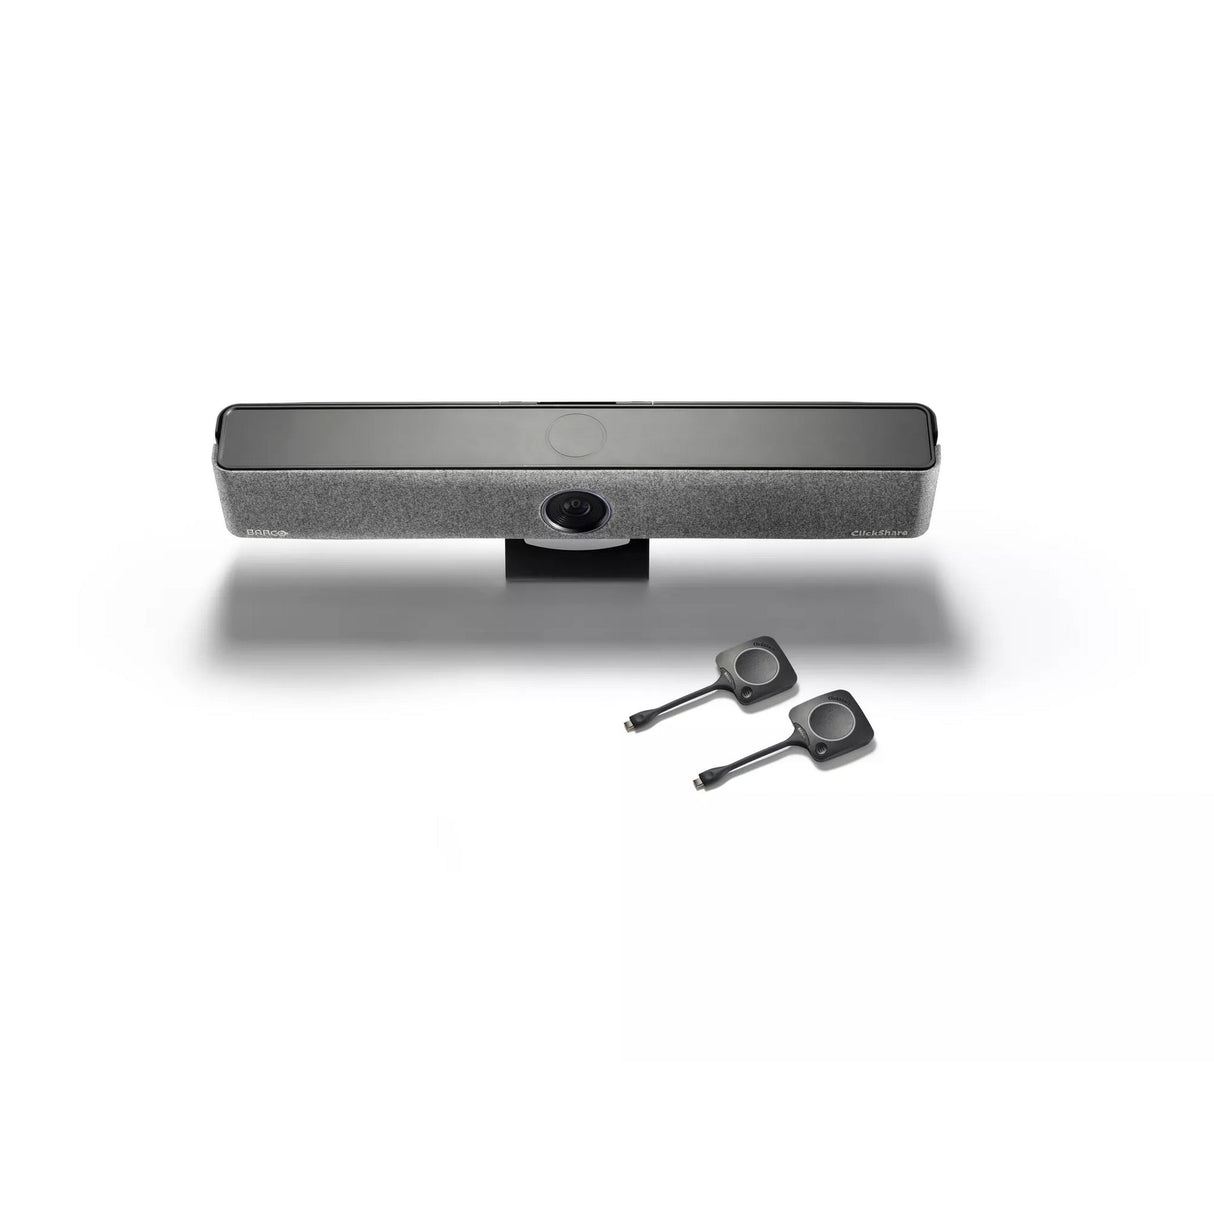 Barco ClickShare Bar Pro Wireless Video Conferencing Bar with 4K Content Sharing (2 Buttons Included)